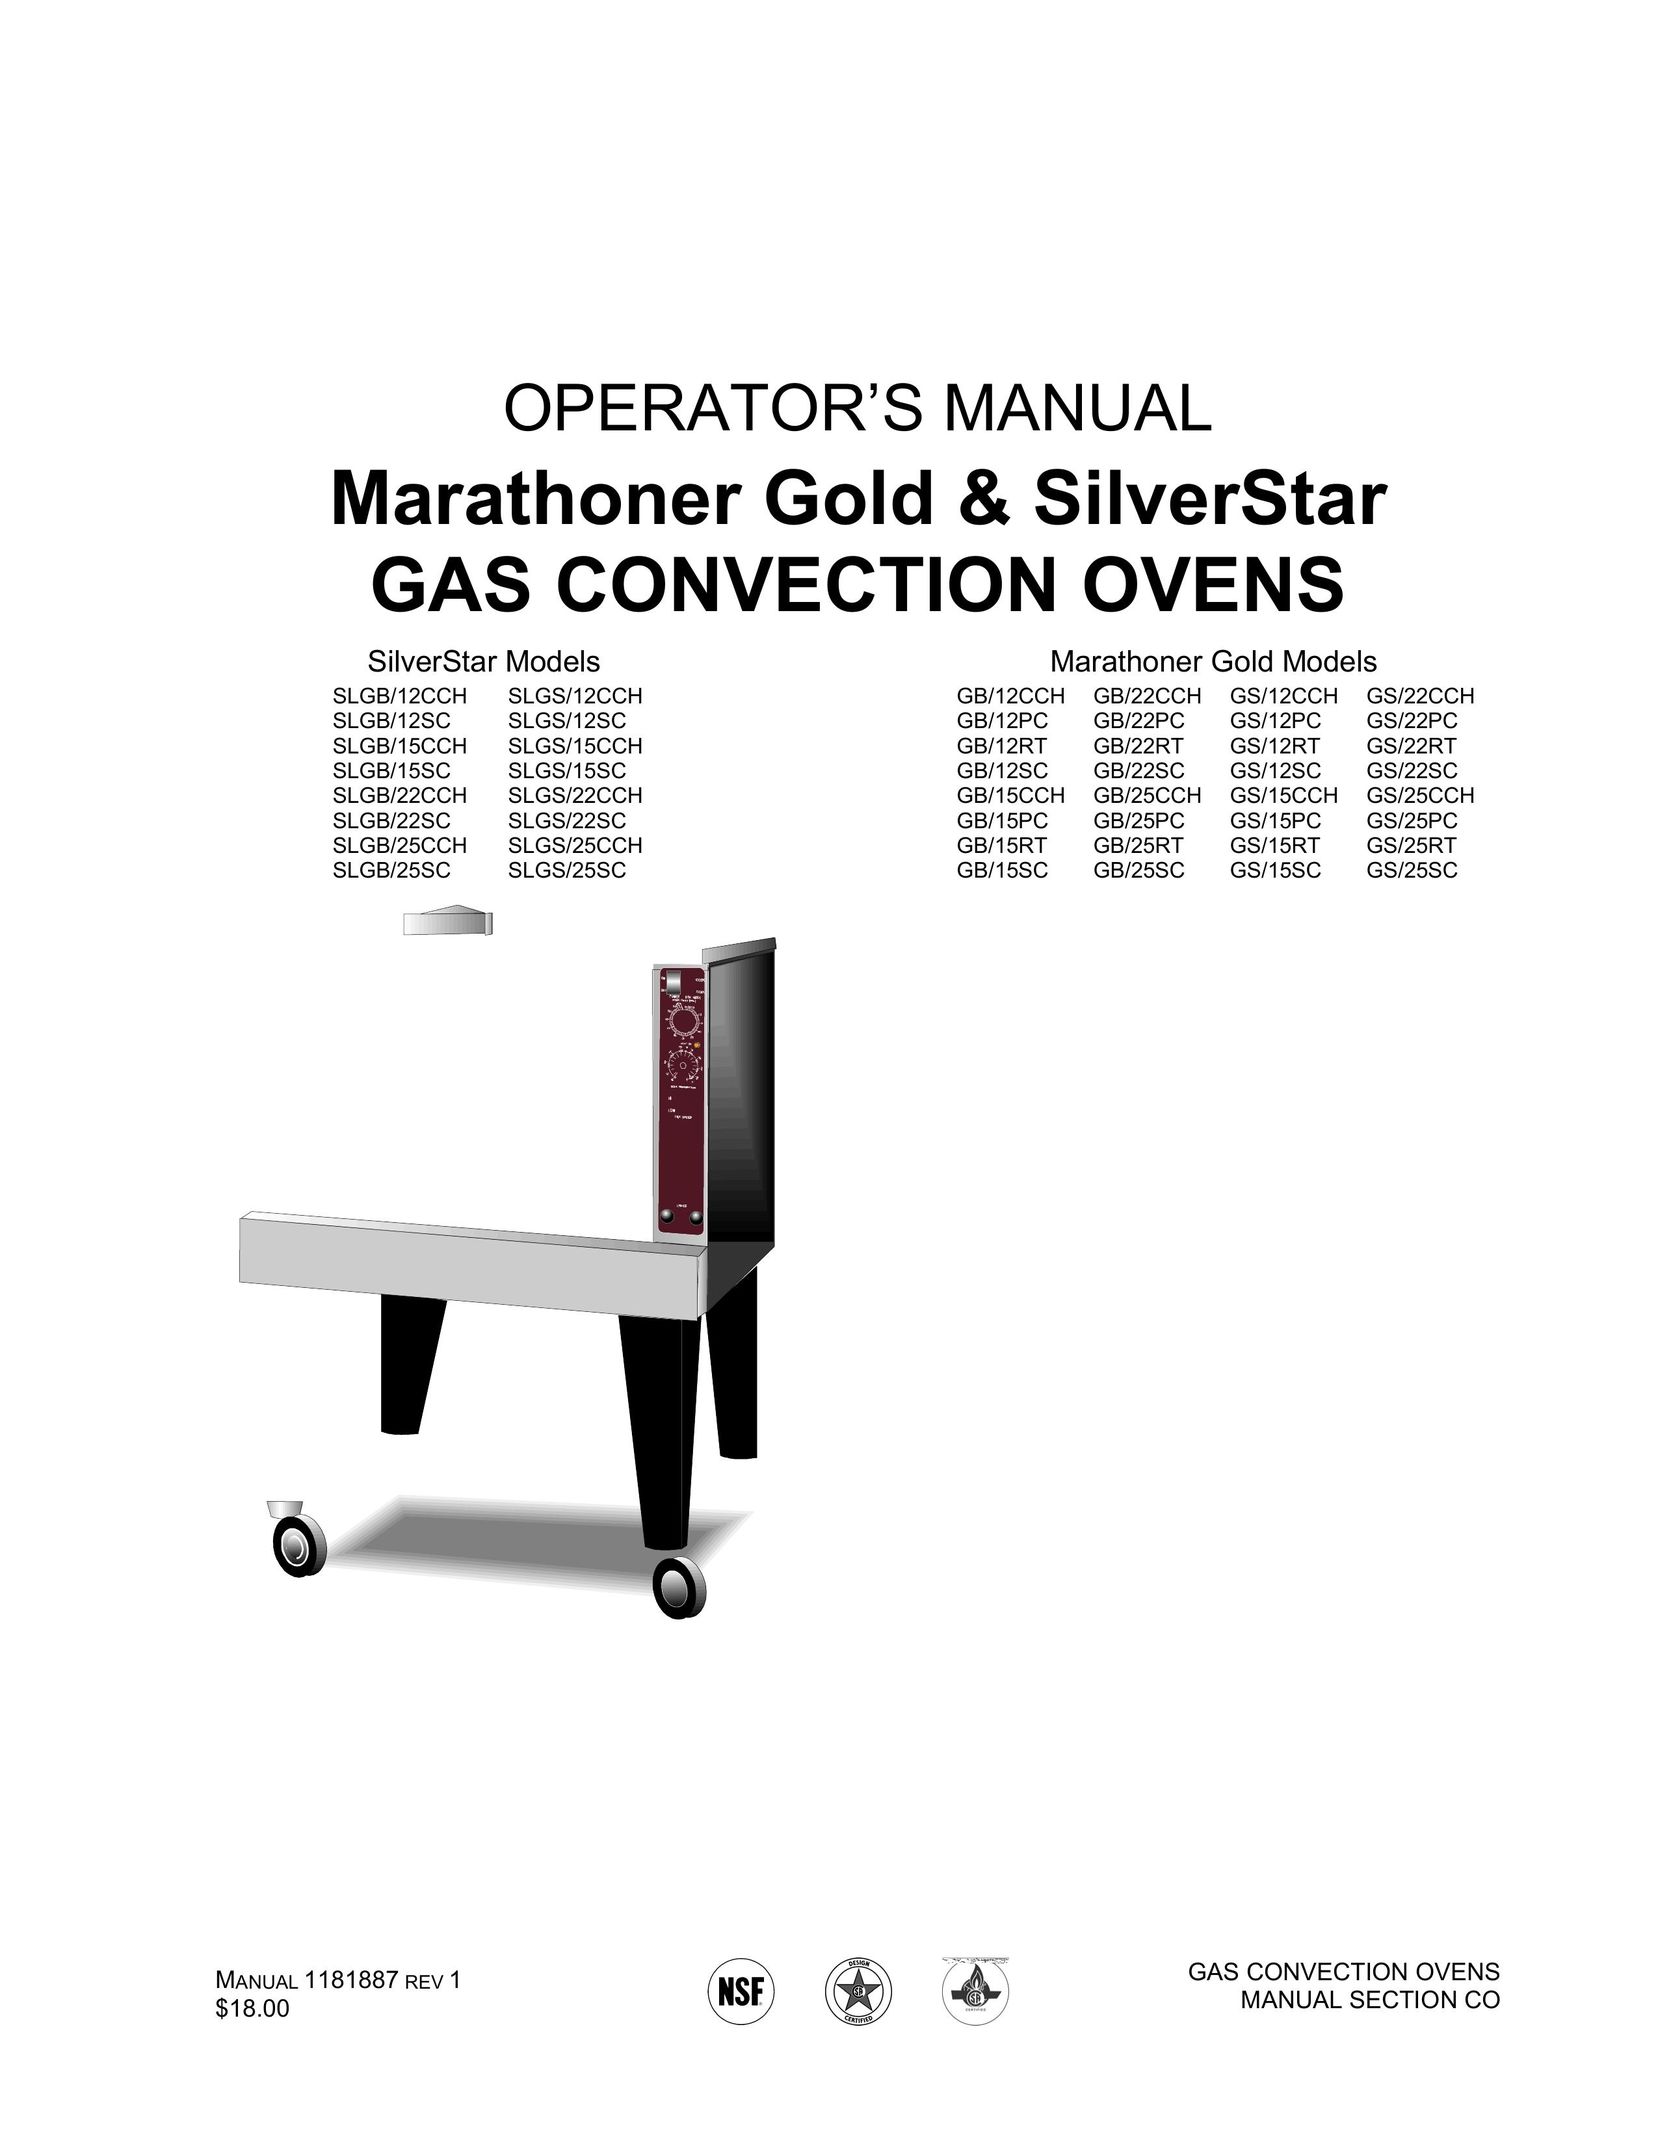 Southbend GB/12SC Oven User Manual